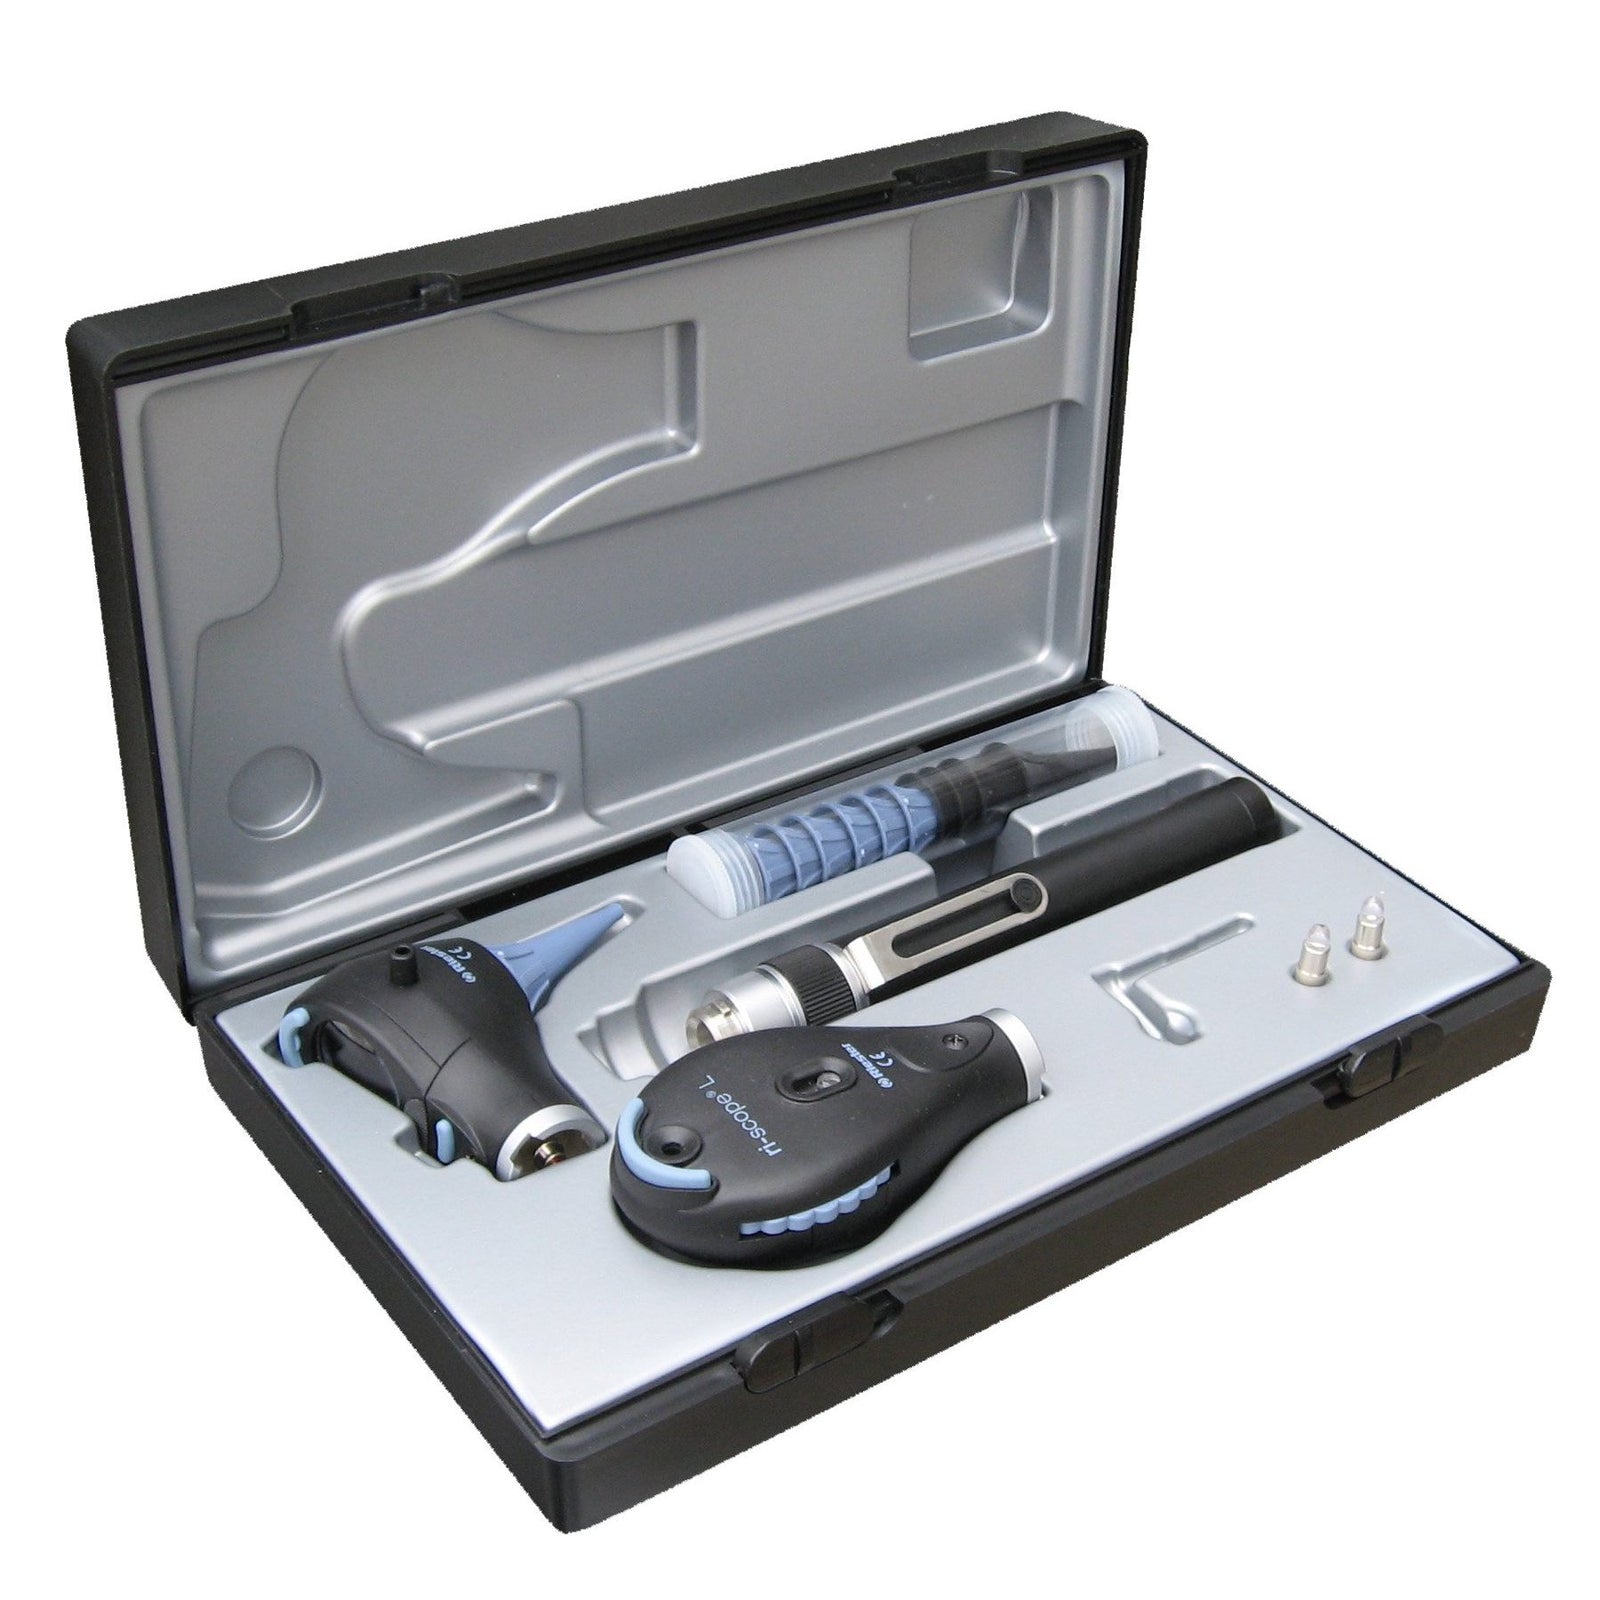 Riester Ri-Scope L Otoscope / Ophthalmoscope L2/L1 XL/HL 2.5 V AA Handle for 2 Alkaline Batteries or Ri-Accu